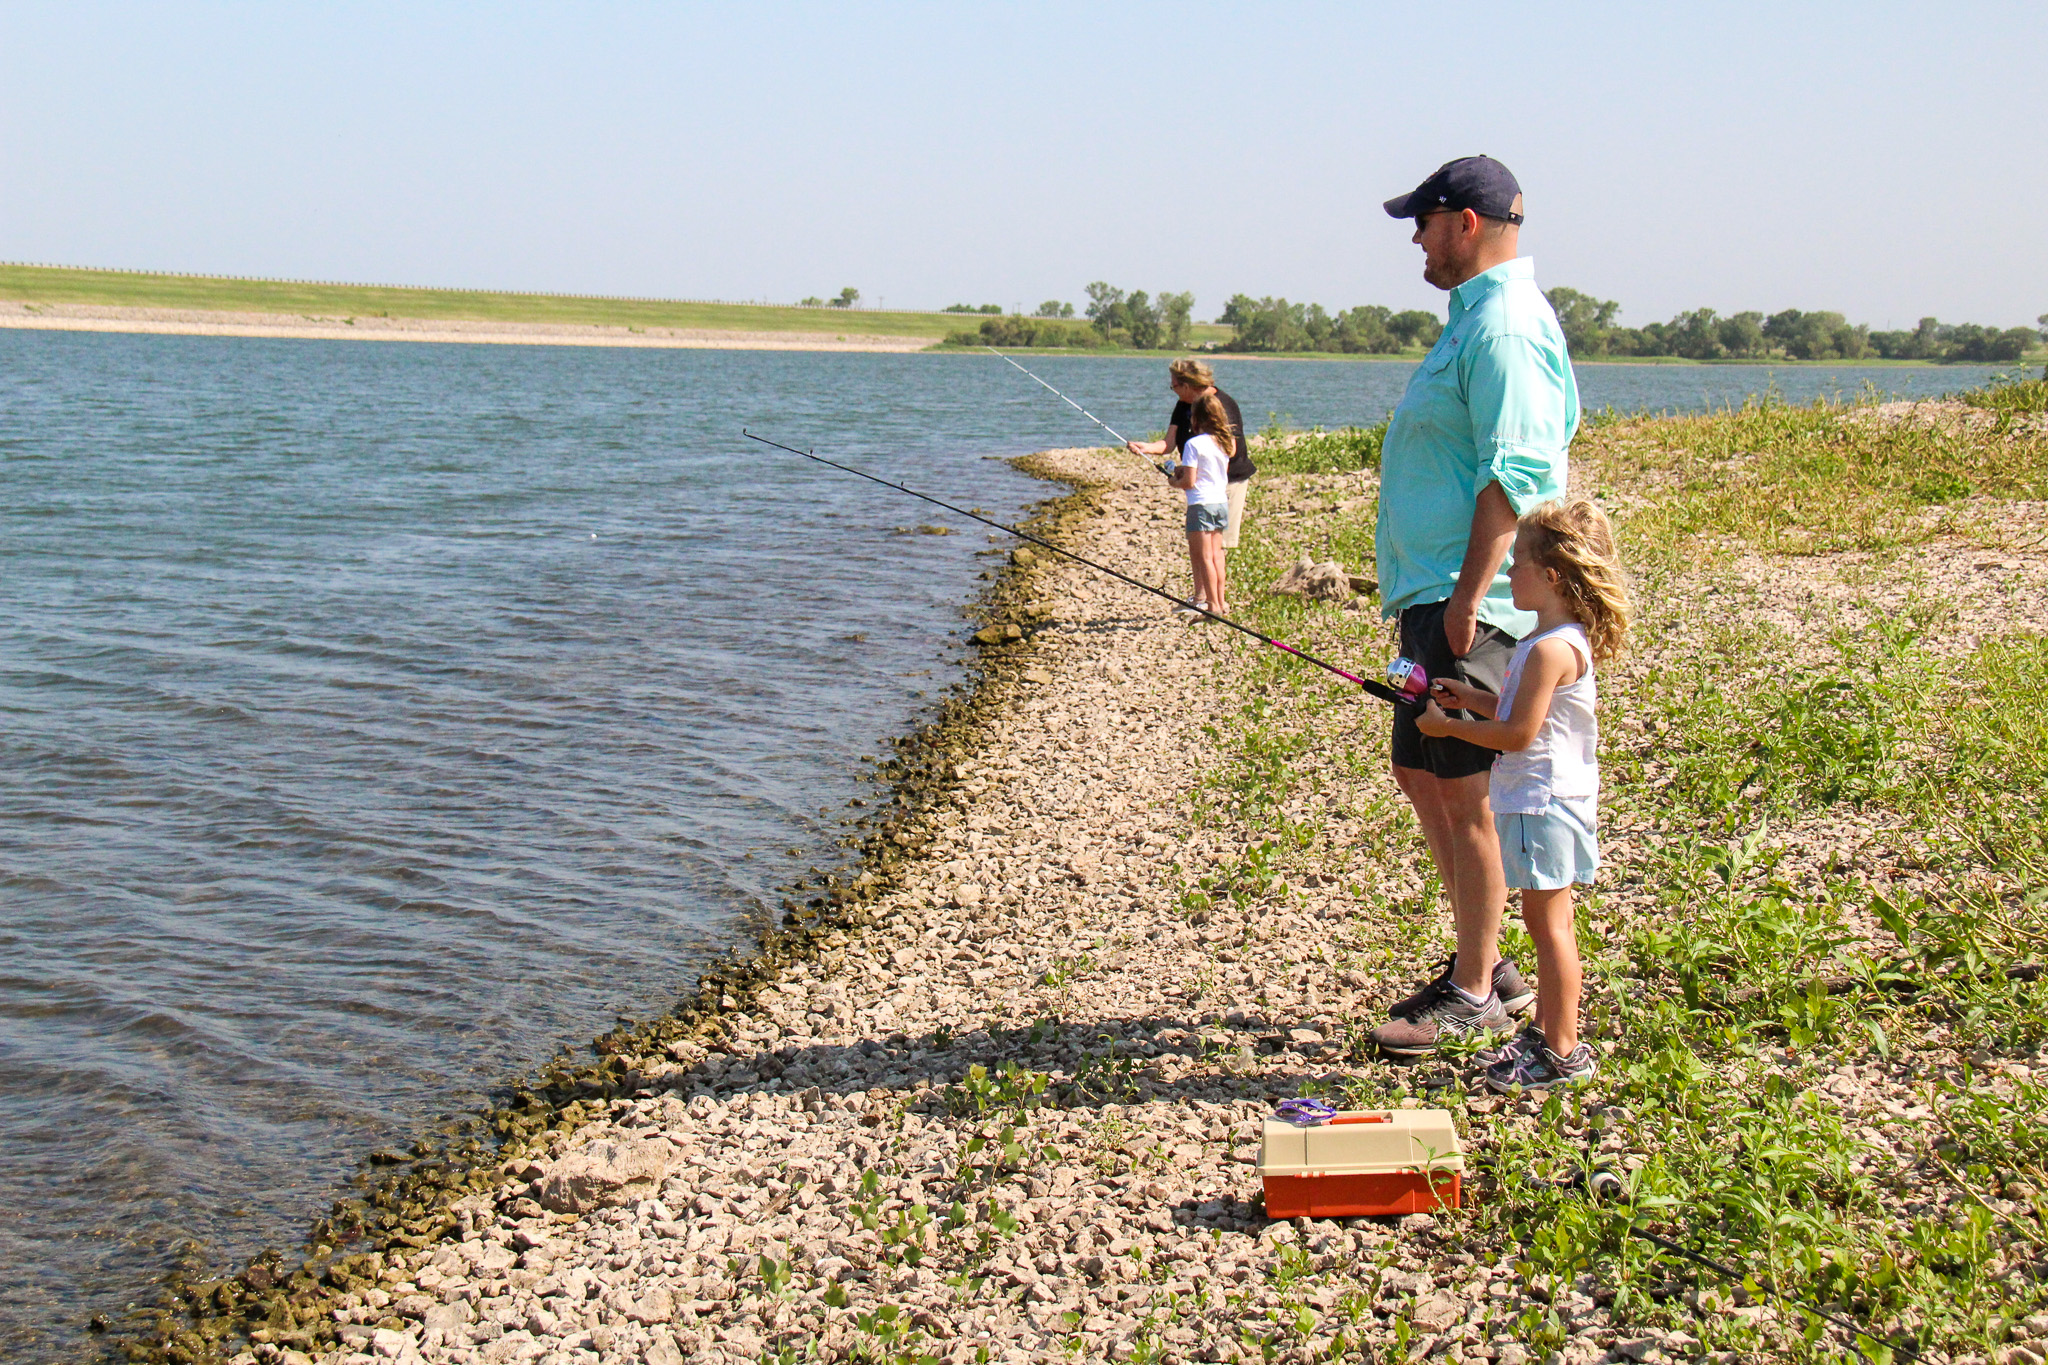 Jonathan Leeper looks across the water at Winfield City Lake beside his daughter Norah, while Nancy Vaught assists Mary Leeper in the background during the first annual Bass N’ BBQ kids’ fishing derby.